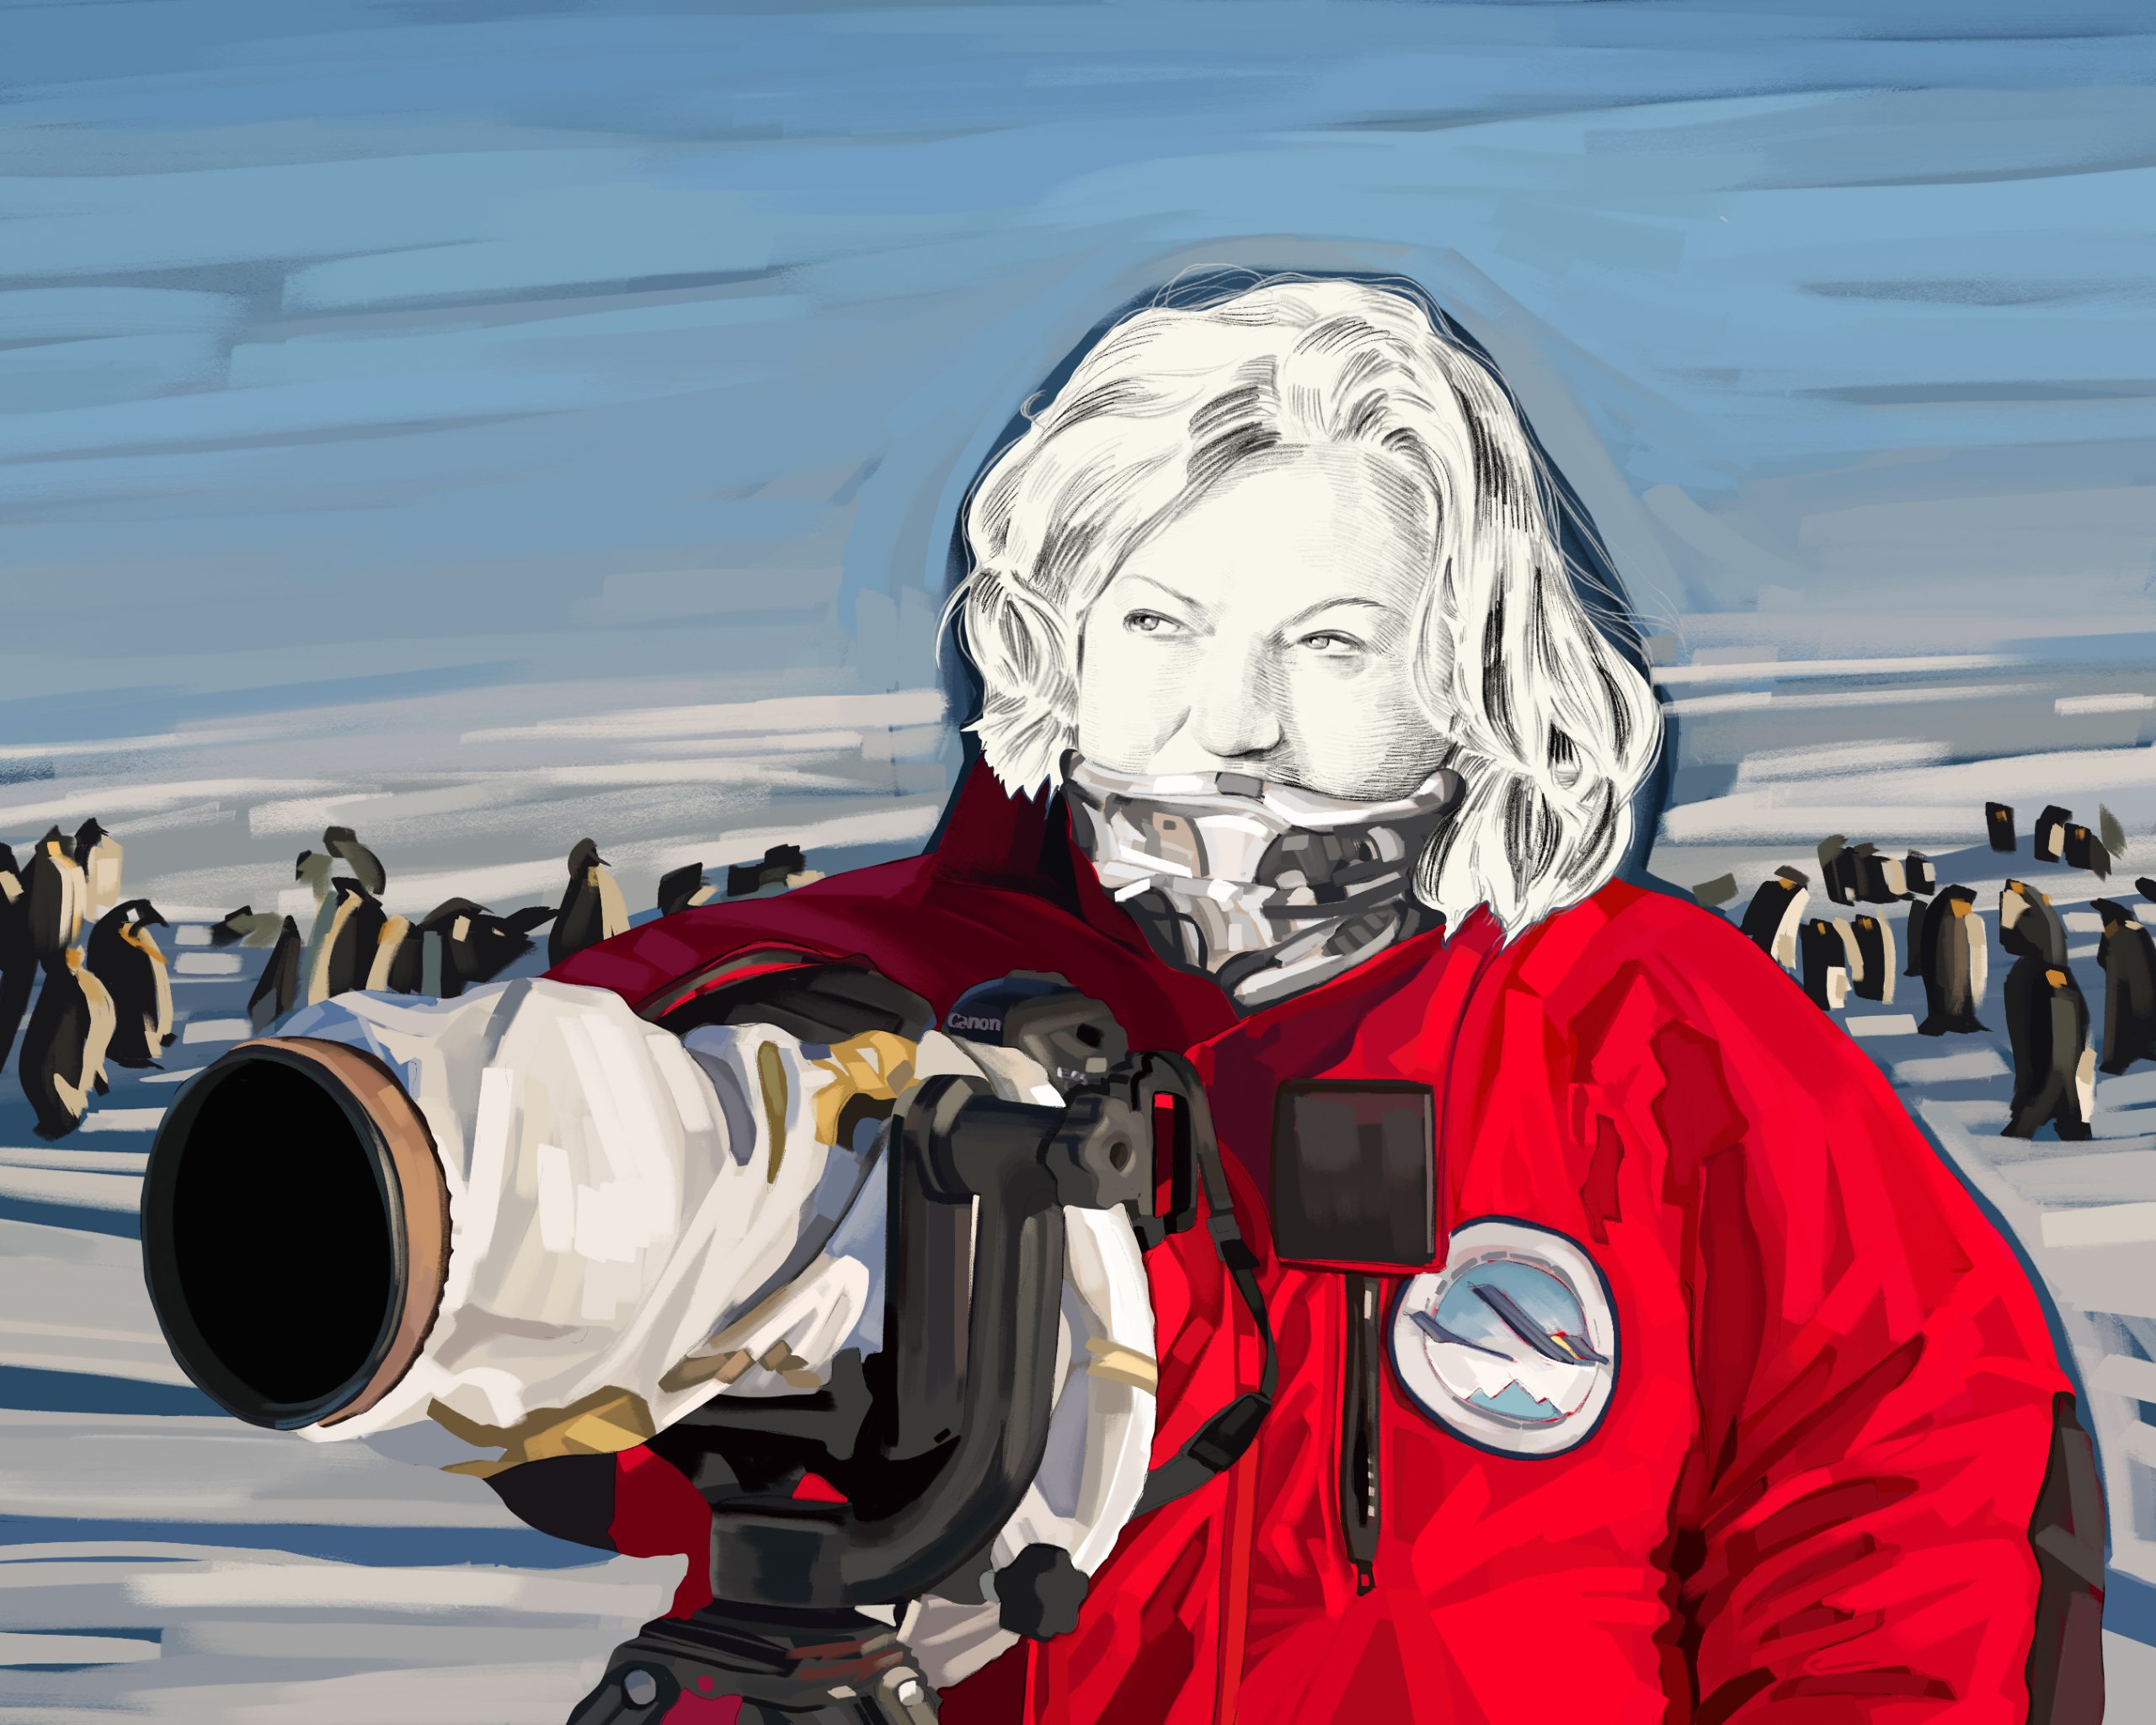 A Rare Podcast at 30 Below Zero — Sue Flood on Antarctica, Making Your Own Luck, Chasing David Attenborough, and Reinventing Yourself (#567)